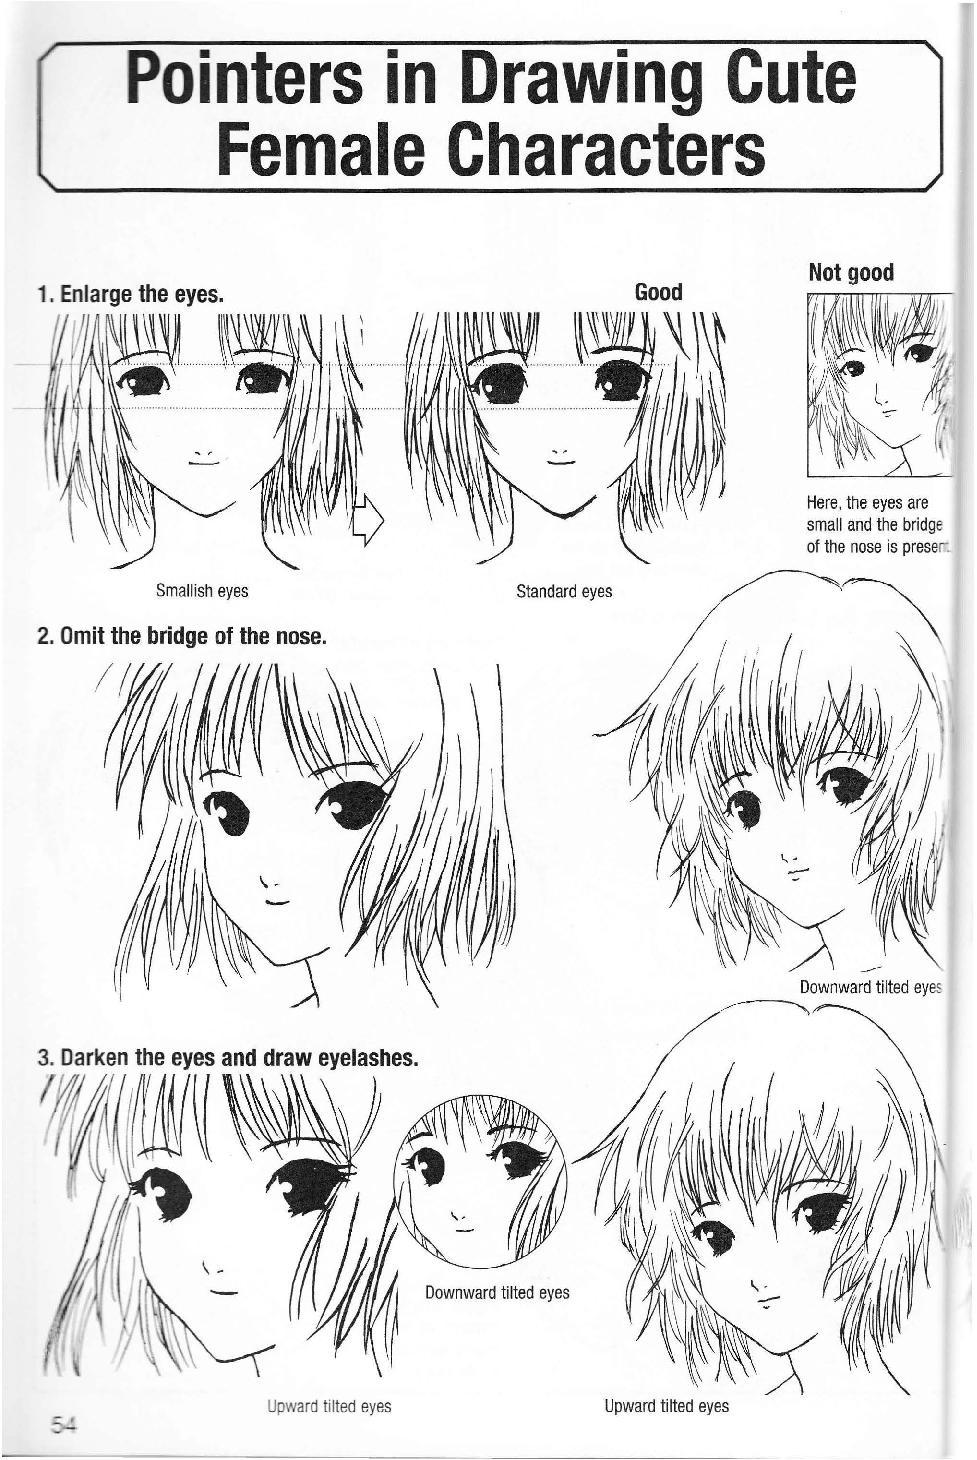 More How to Draw Manga Vol. 2 - Penning Characters 55